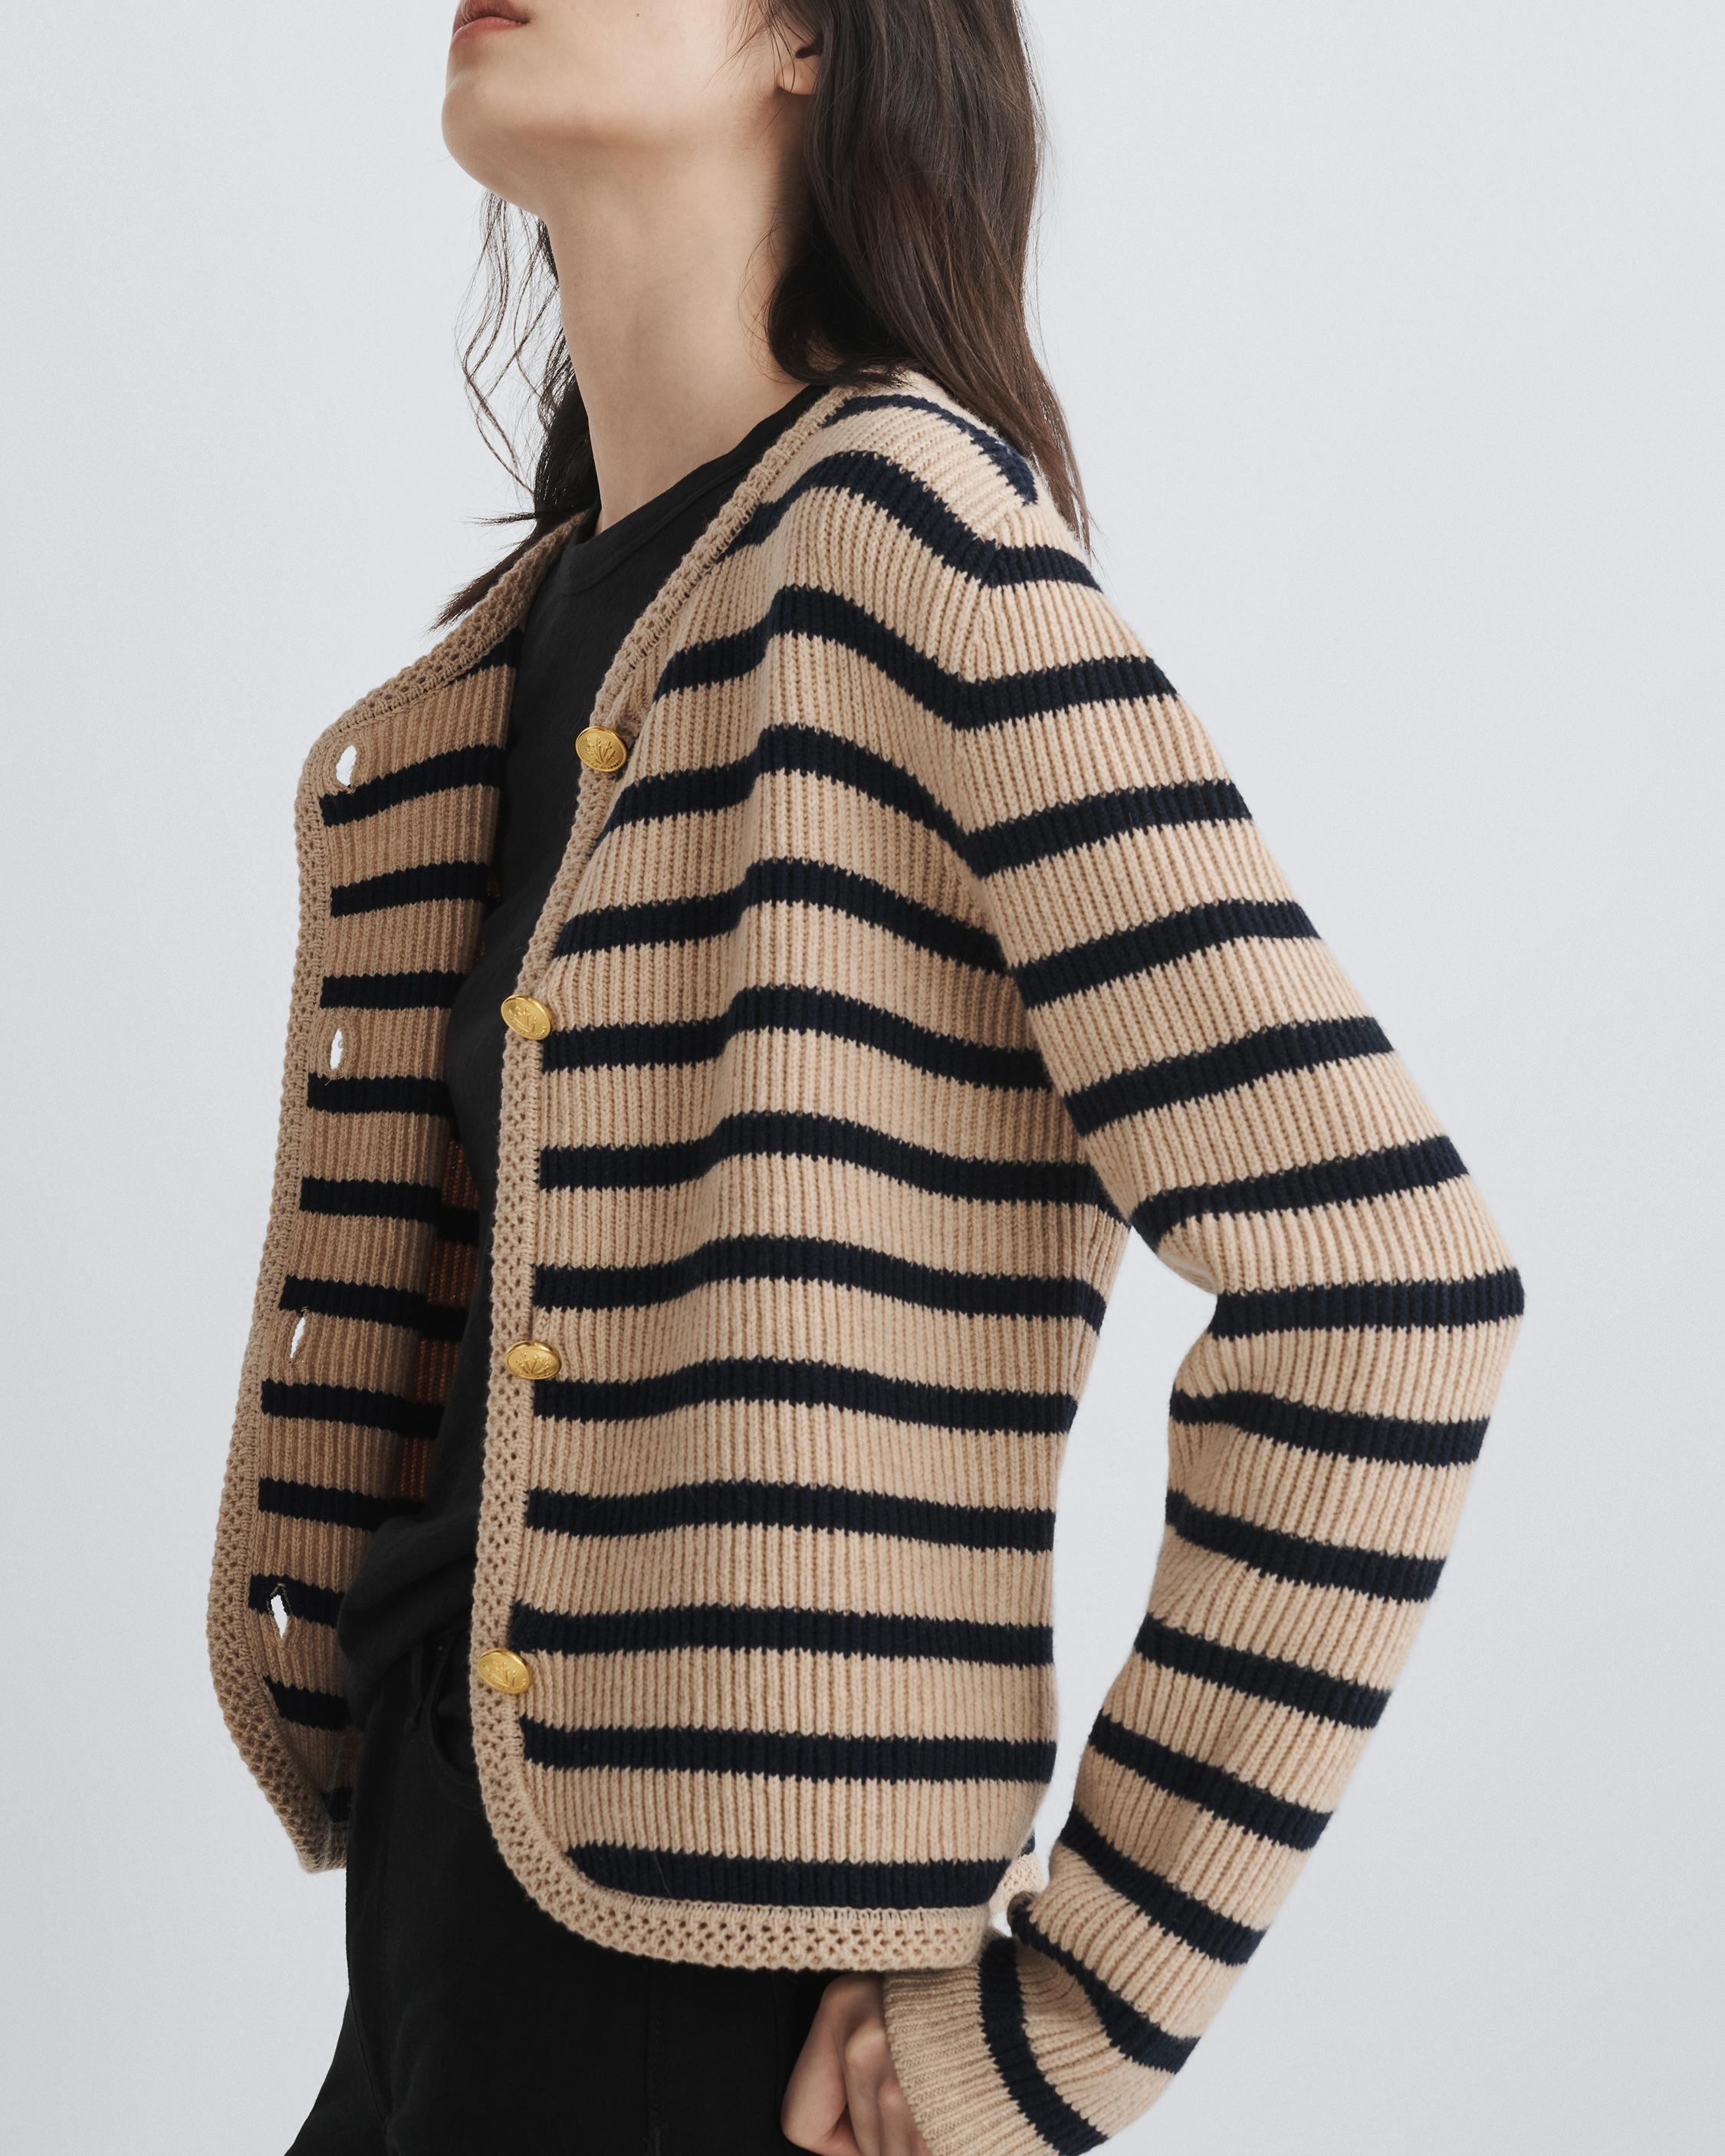 Nancy Wool Cardigan
Relaxed Fit Sweater - 2